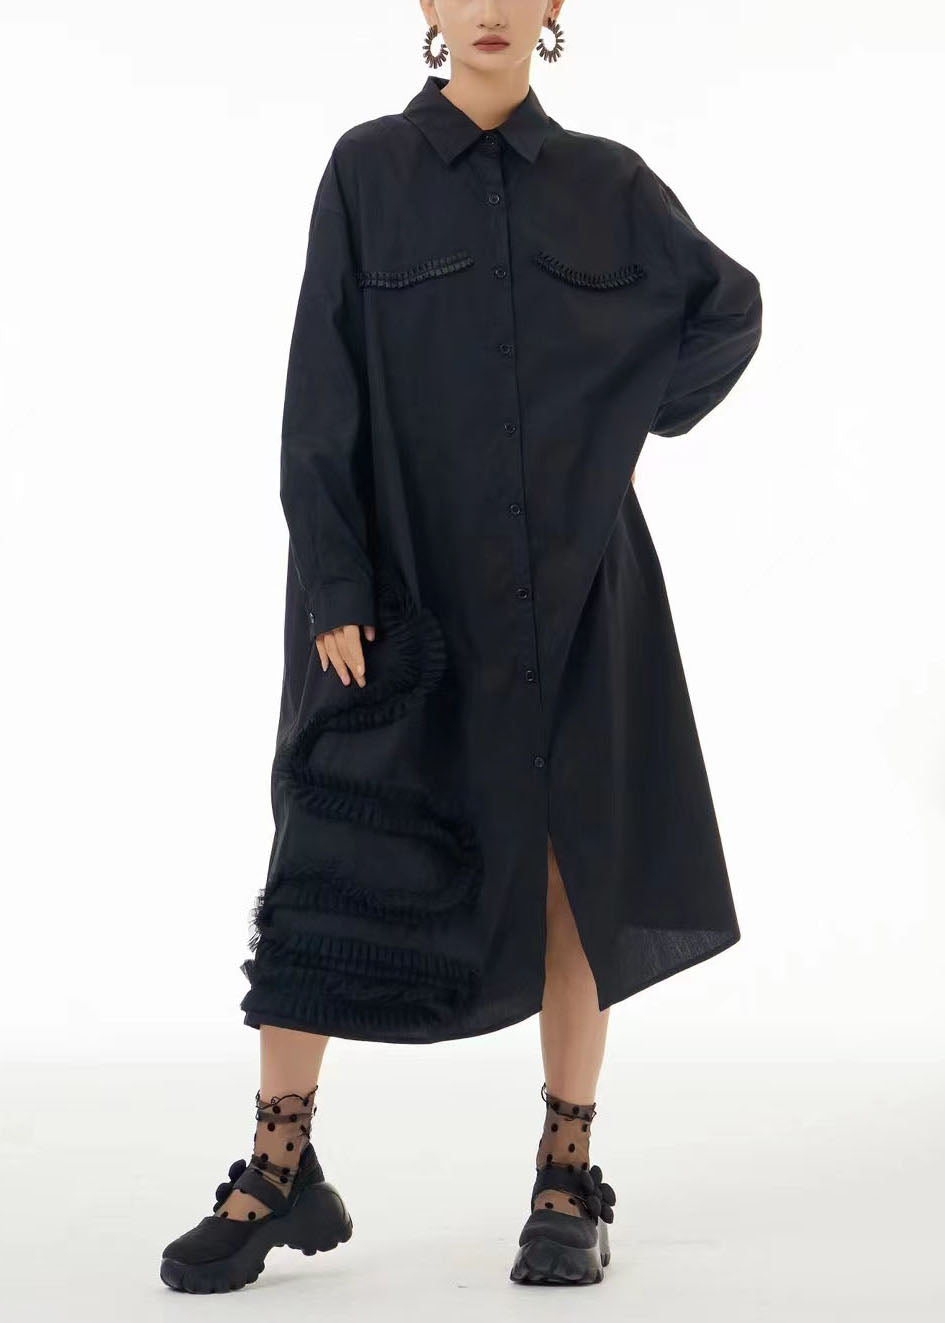 peopleterritory Fashion Black Oversized Patchwork Wrinkled Cotton Shirt Dress Spring LC0103